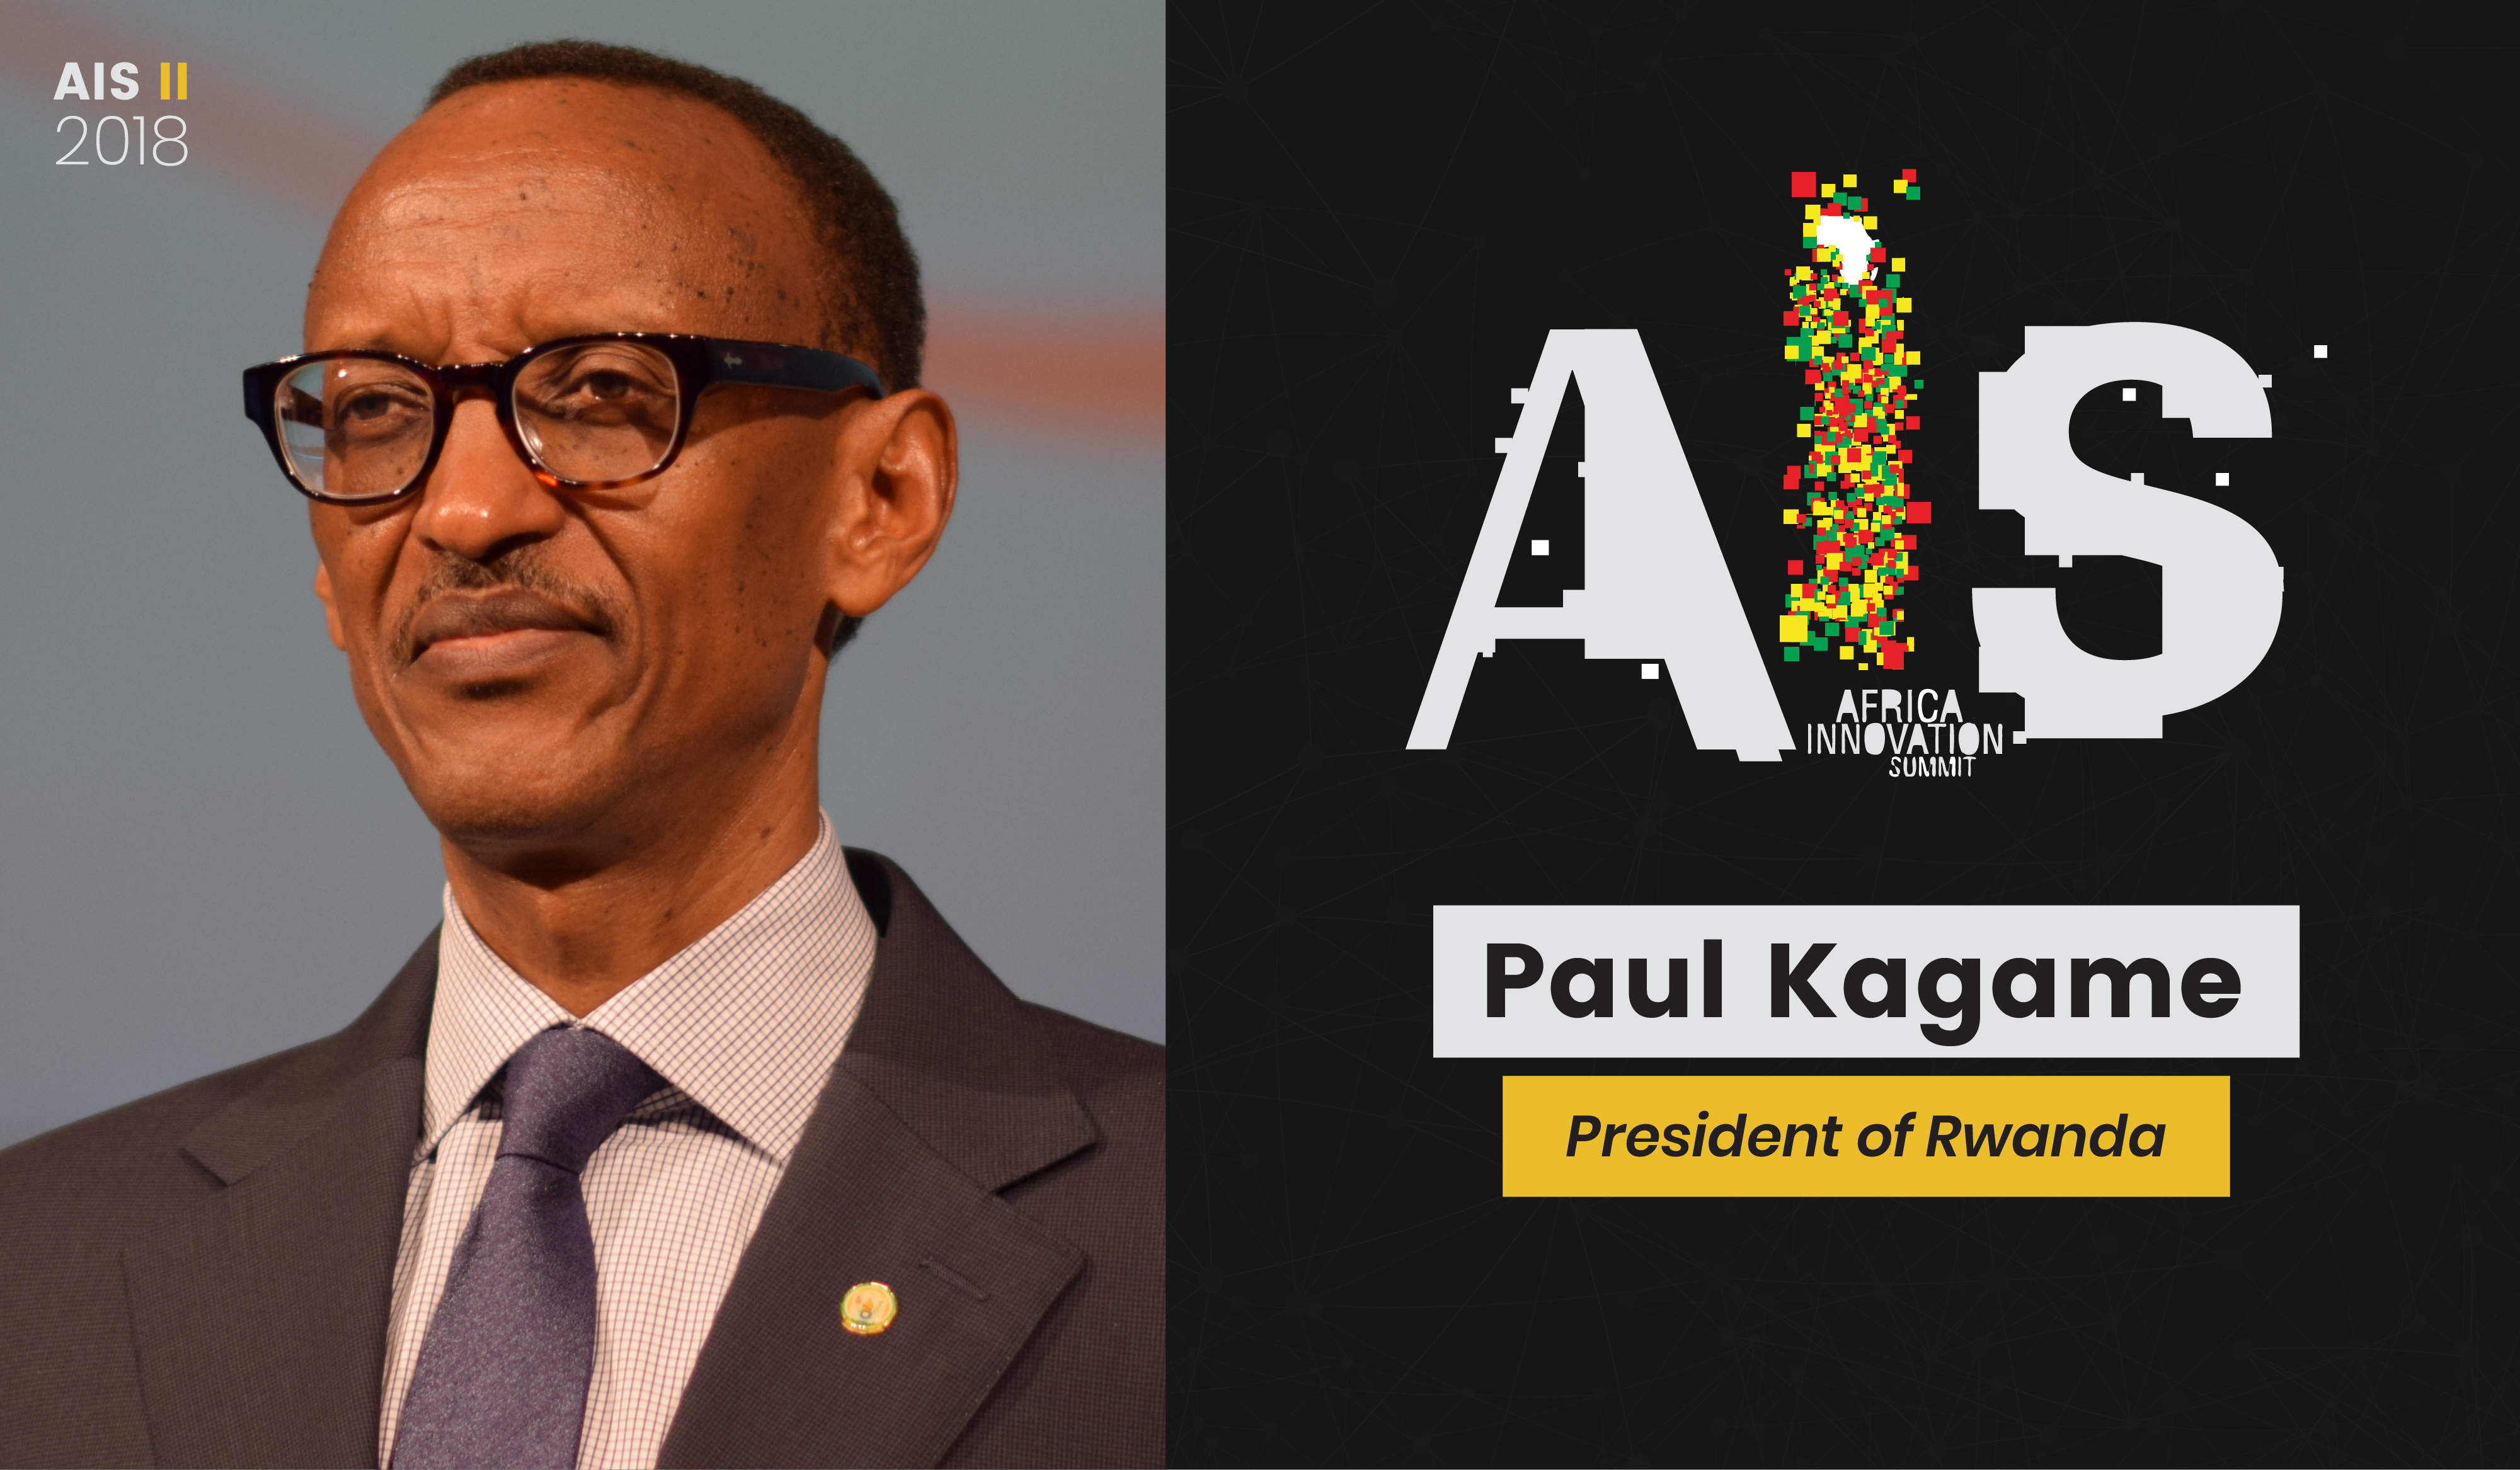 H.E Paul Kagame, President of Rwanda and AU Chairperson to attend the #AIS2018